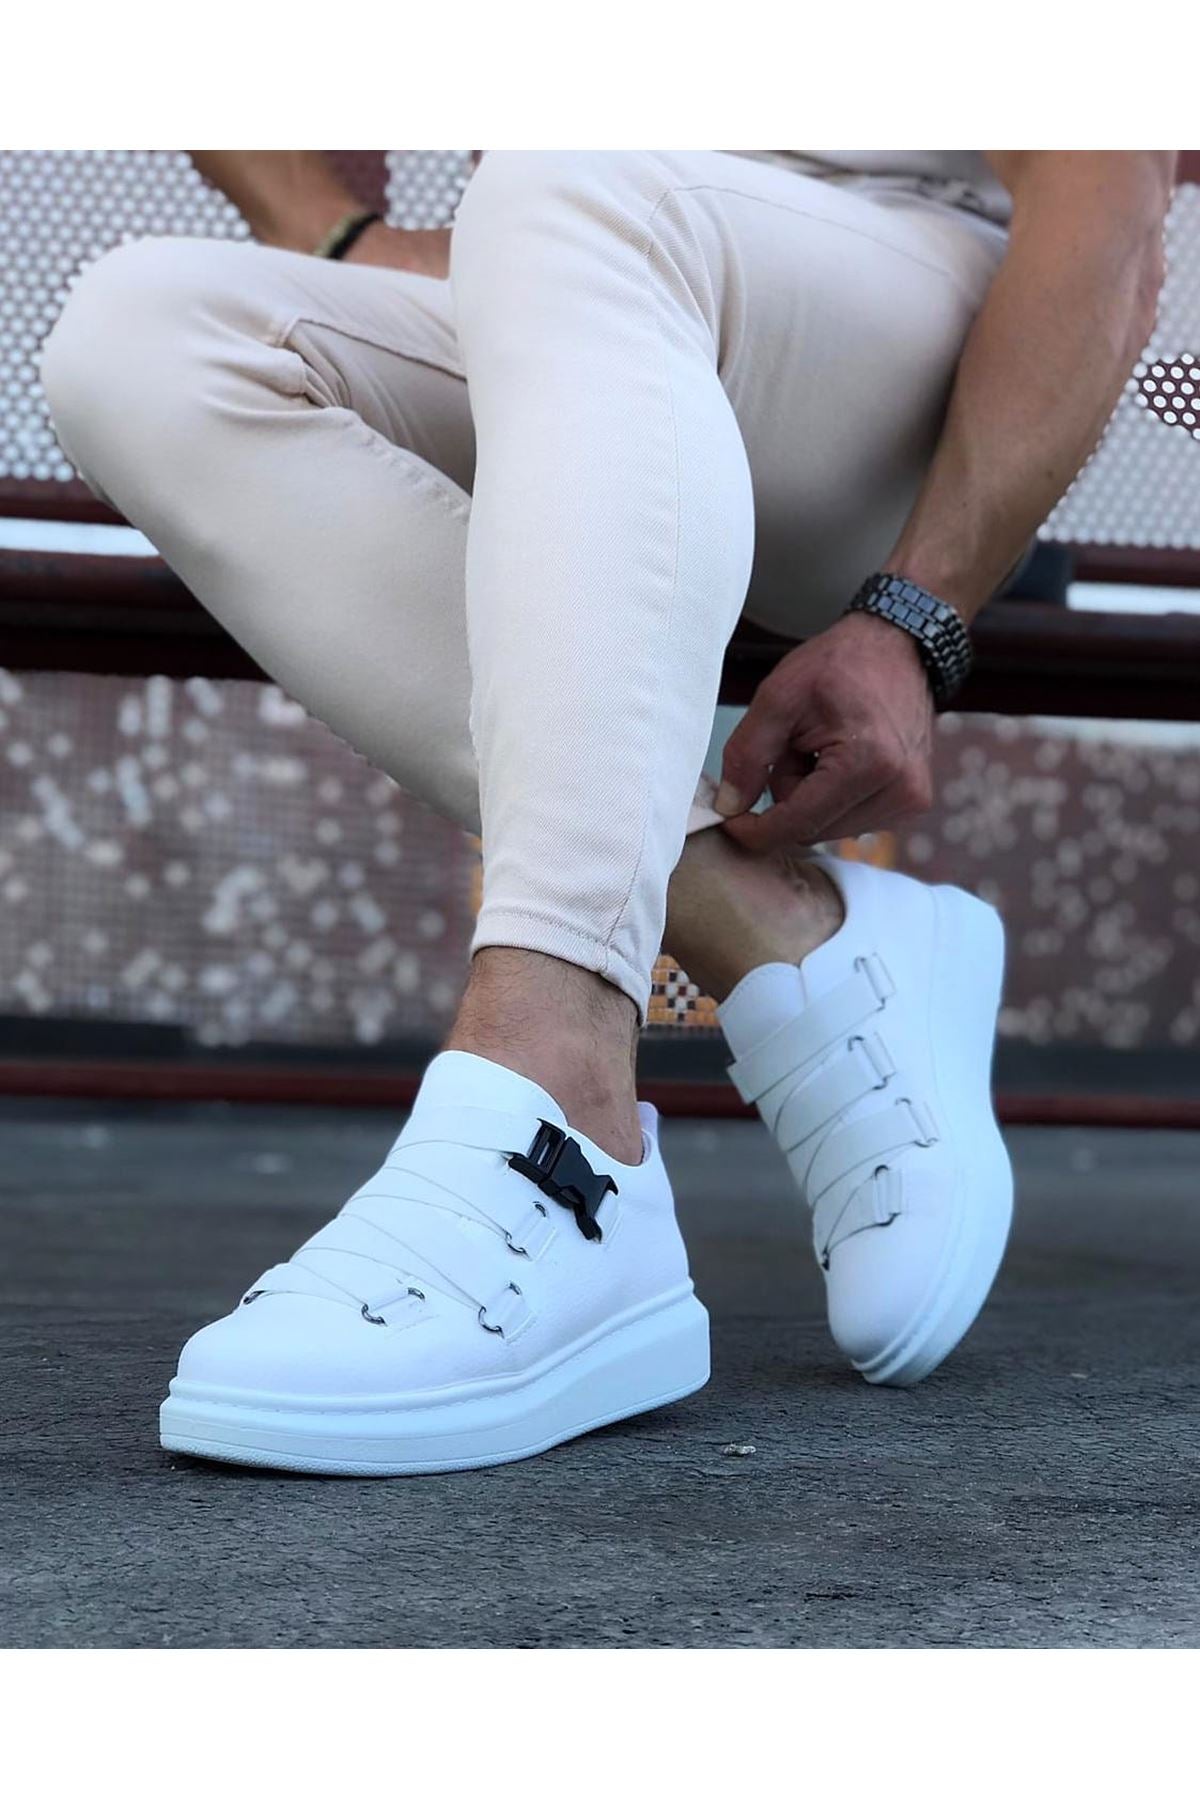 WG033 White Men's High-Sole Shoes Sneakers - STREETMODE ™